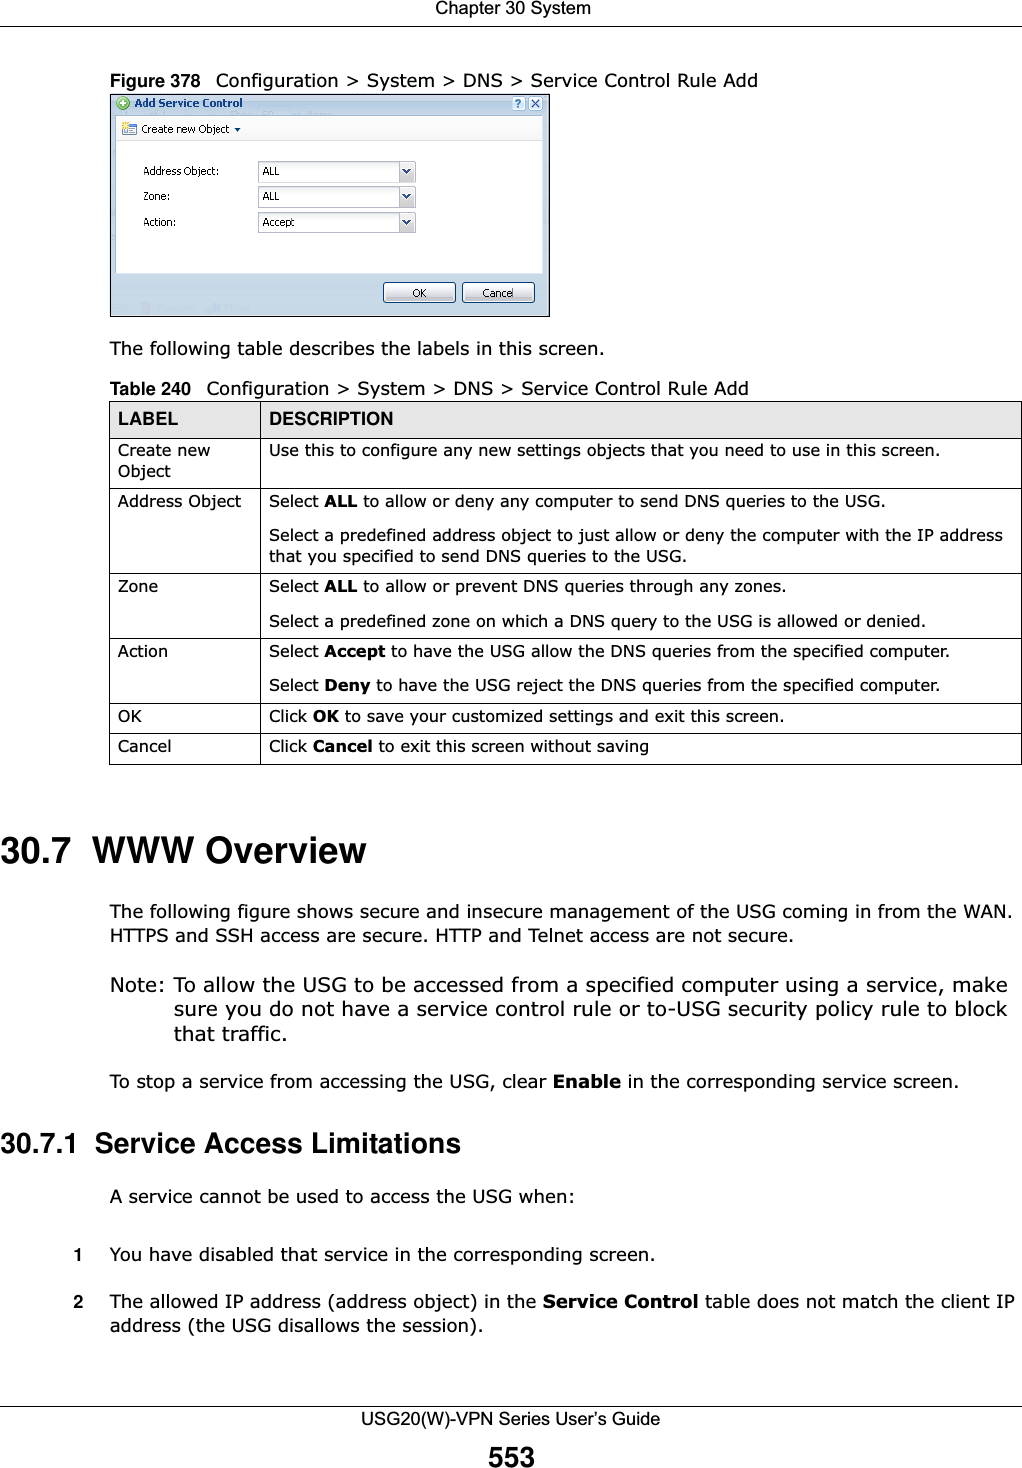  Chapter 30 SystemUSG20(W)-VPN Series User’s Guide553Figure 378   Configuration &gt; System &gt; DNS &gt; Service Control Rule AddThe following table describes the labels in this screen.  30.7  WWW OverviewThe following figure shows secure and insecure management of the USG coming in from the WAN. HTTPS and SSH access are secure. HTTP and Telnet access are not secure. Note: To allow the USG to be accessed from a specified computer using a service, make sure you do not have a service control rule or to-USG security policy rule to block that traffic. To stop a service from accessing the USG, clear Enable in the corresponding service screen. 30.7.1  Service Access LimitationsA service cannot be used to access the USG when:1You have disabled that service in the corresponding screen.2The allowed IP address (address object) in the Service Control table does not match the client IP address (the USG disallows the session).Table 240   Configuration &gt; System &gt; DNS &gt; Service Control Rule AddLABEL DESCRIPTIONCreate new ObjectUse this to configure any new settings objects that you need to use in this screen.Address Object Select ALL to allow or deny any computer to send DNS queries to the USG.Select a predefined address object to just allow or deny the computer with the IP address that you specified to send DNS queries to the USG.Zone Select ALL to allow or prevent DNS queries through any zones.Select a predefined zone on which a DNS query to the USG is allowed or denied.Action Select Accept to have the USG allow the DNS queries from the specified computer.Select Deny to have the USG reject the DNS queries from the specified computer.OK Click OK to save your customized settings and exit this screen. Cancel Click Cancel to exit this screen without saving